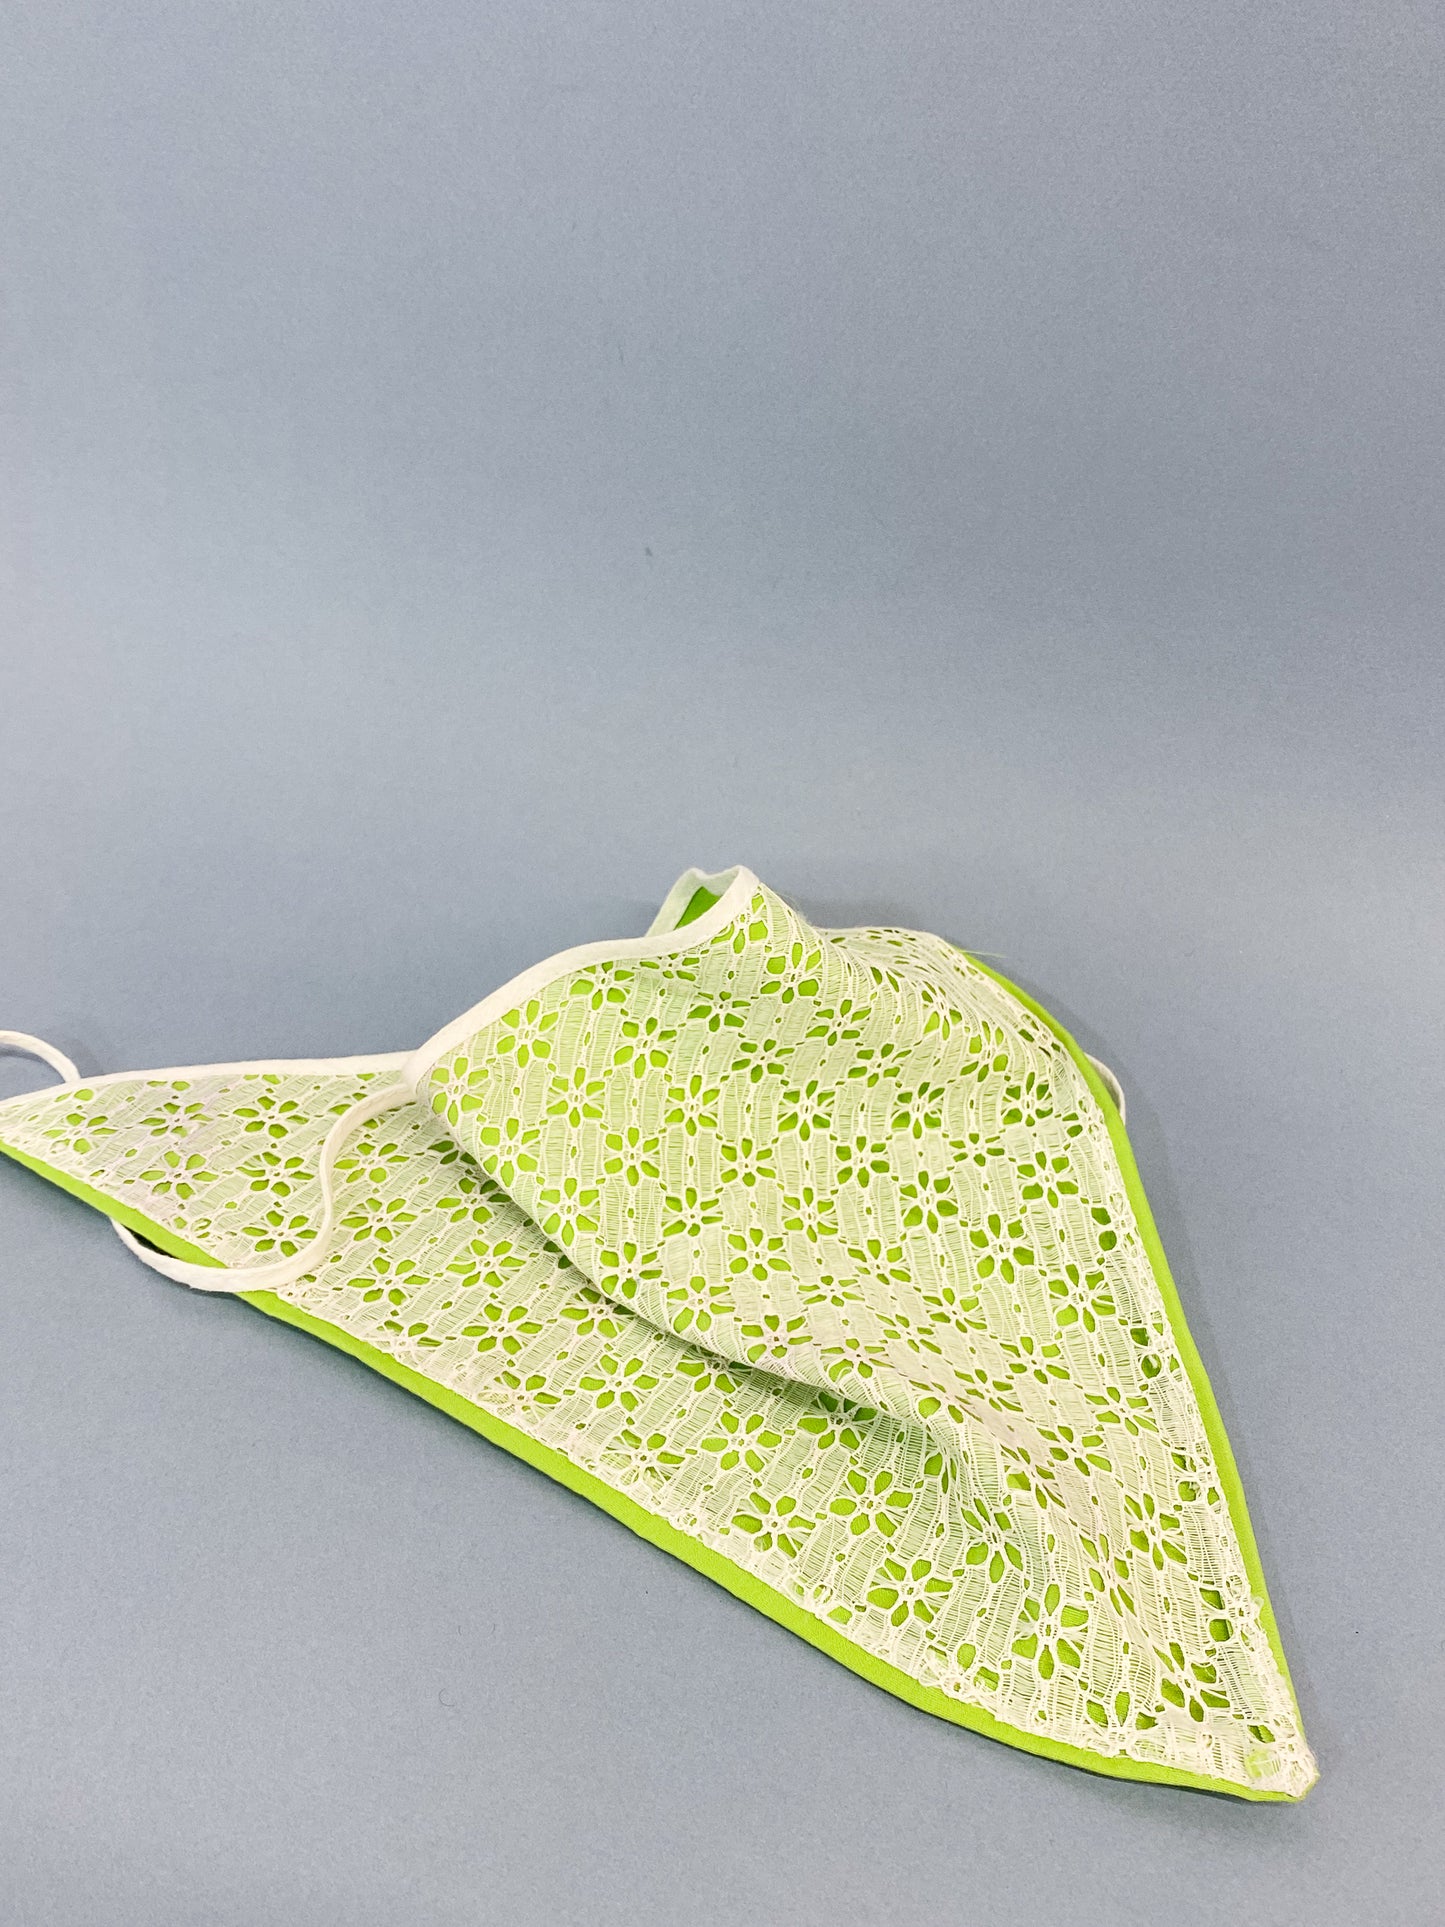 60's "Marvelous Mrs. Maisel" Neon Green & Floral Lace Triangle Head Scarf Kerchief